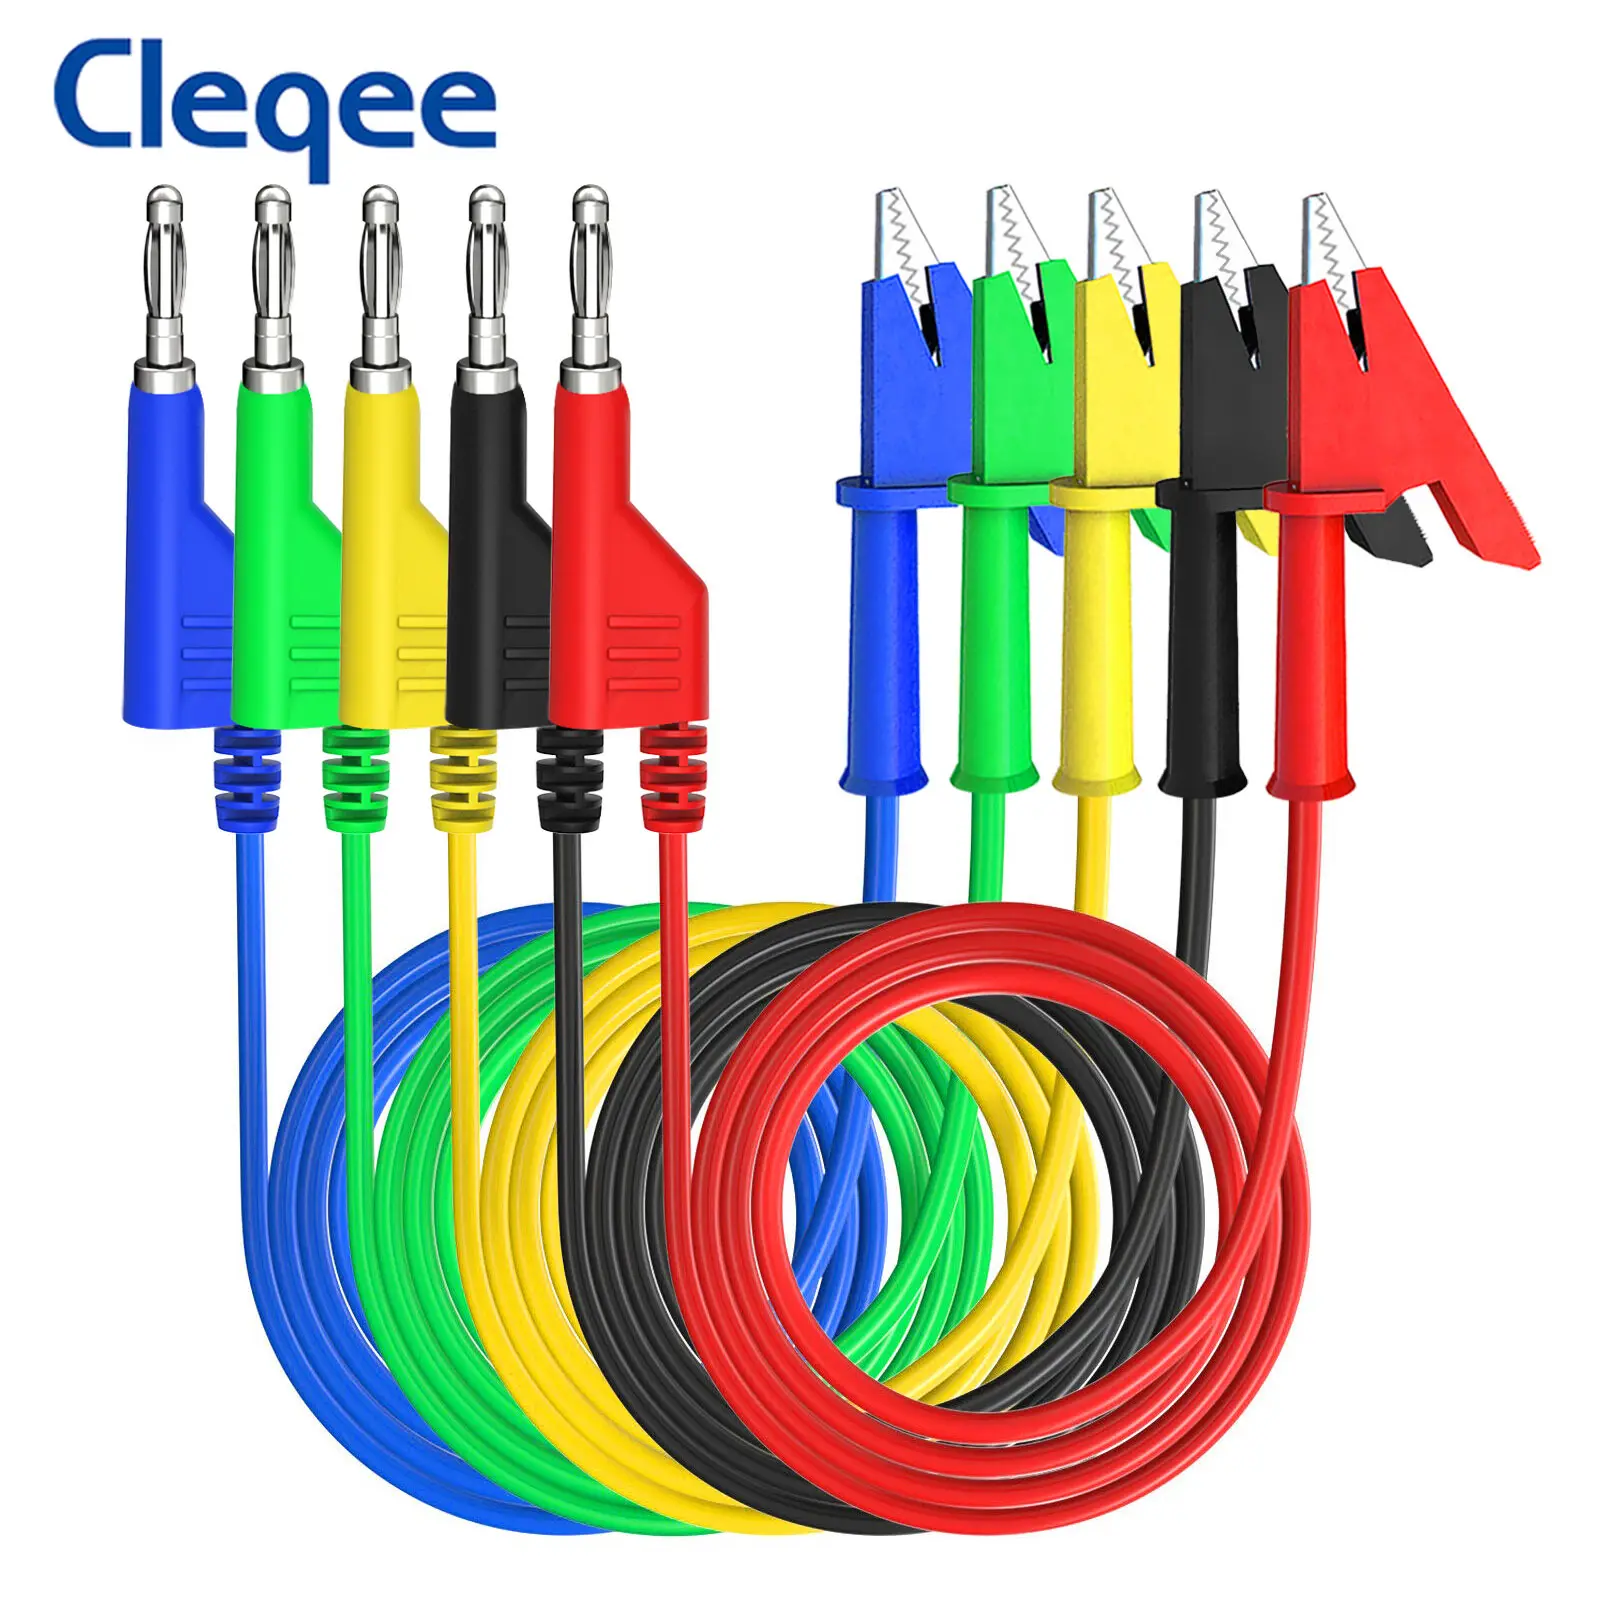 Cleqee P1037 4mm Banana Plug To Alligator Clip Test Leads Kit Crocodile Clamps Multimeter Cable 1M Wire 1000V/15A